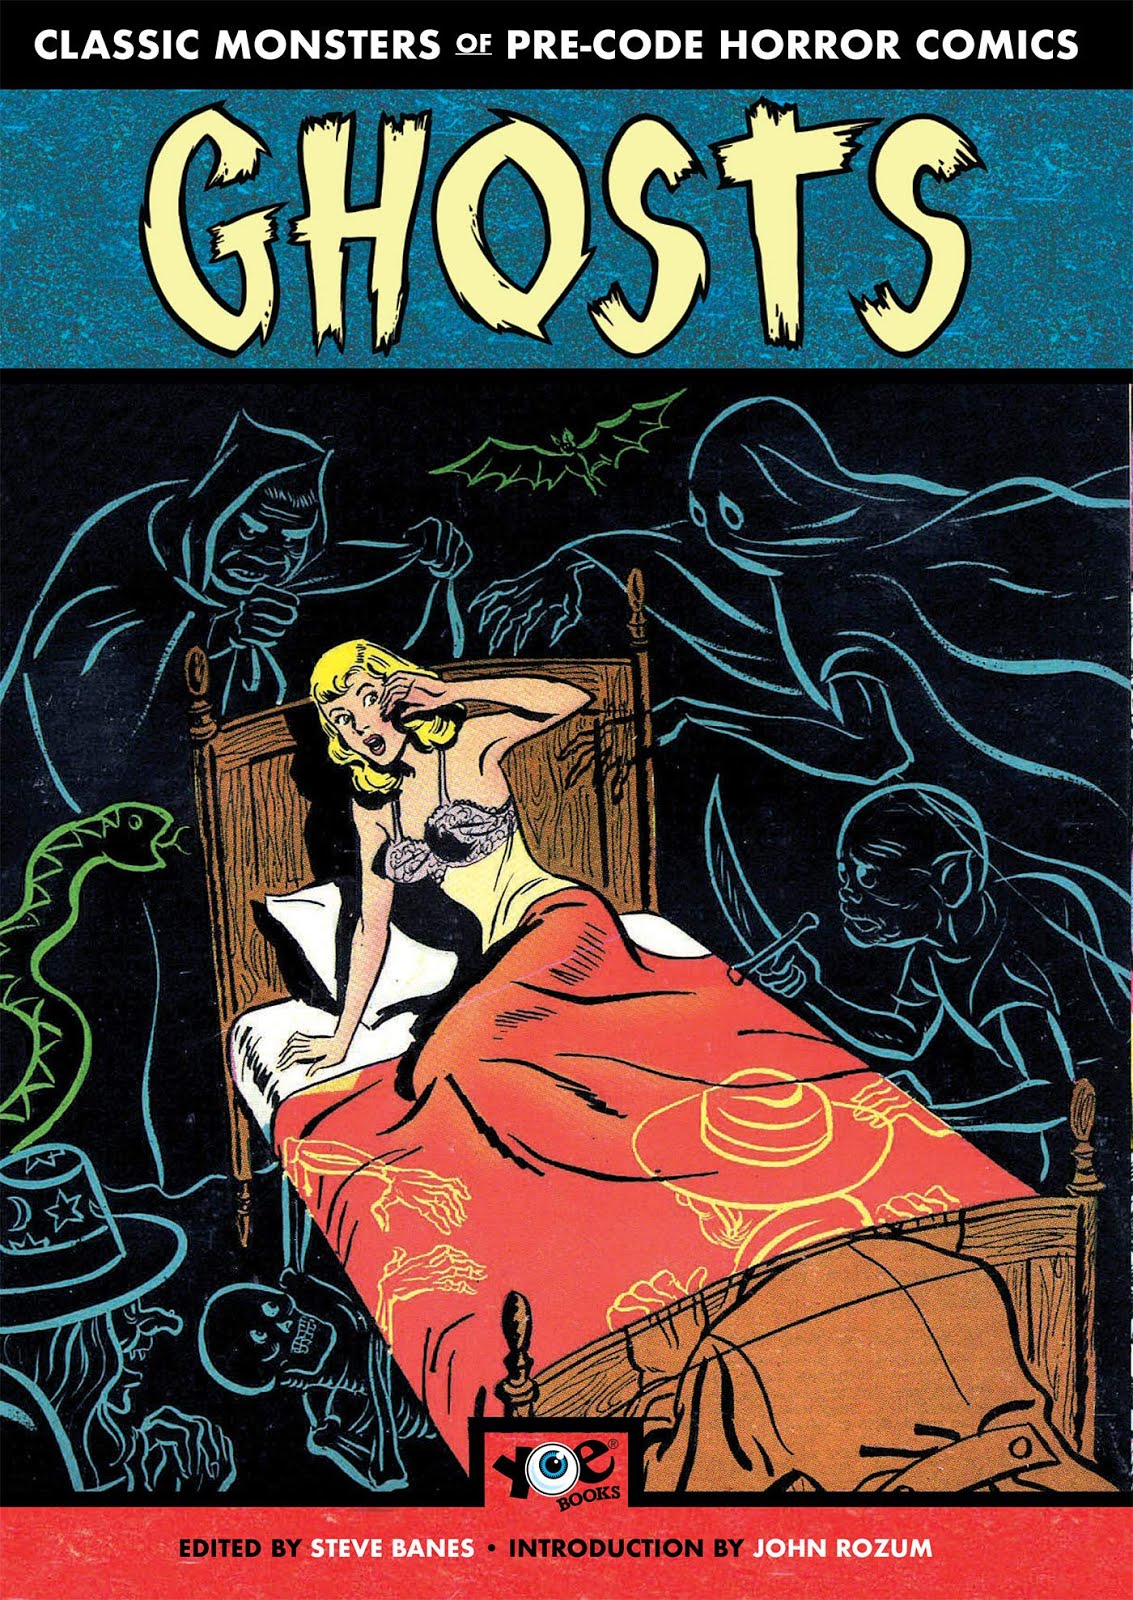 GHOSTS: Classic Monsters of Pre-Code Horror Comics Paperback (Edited by Steve Banes)